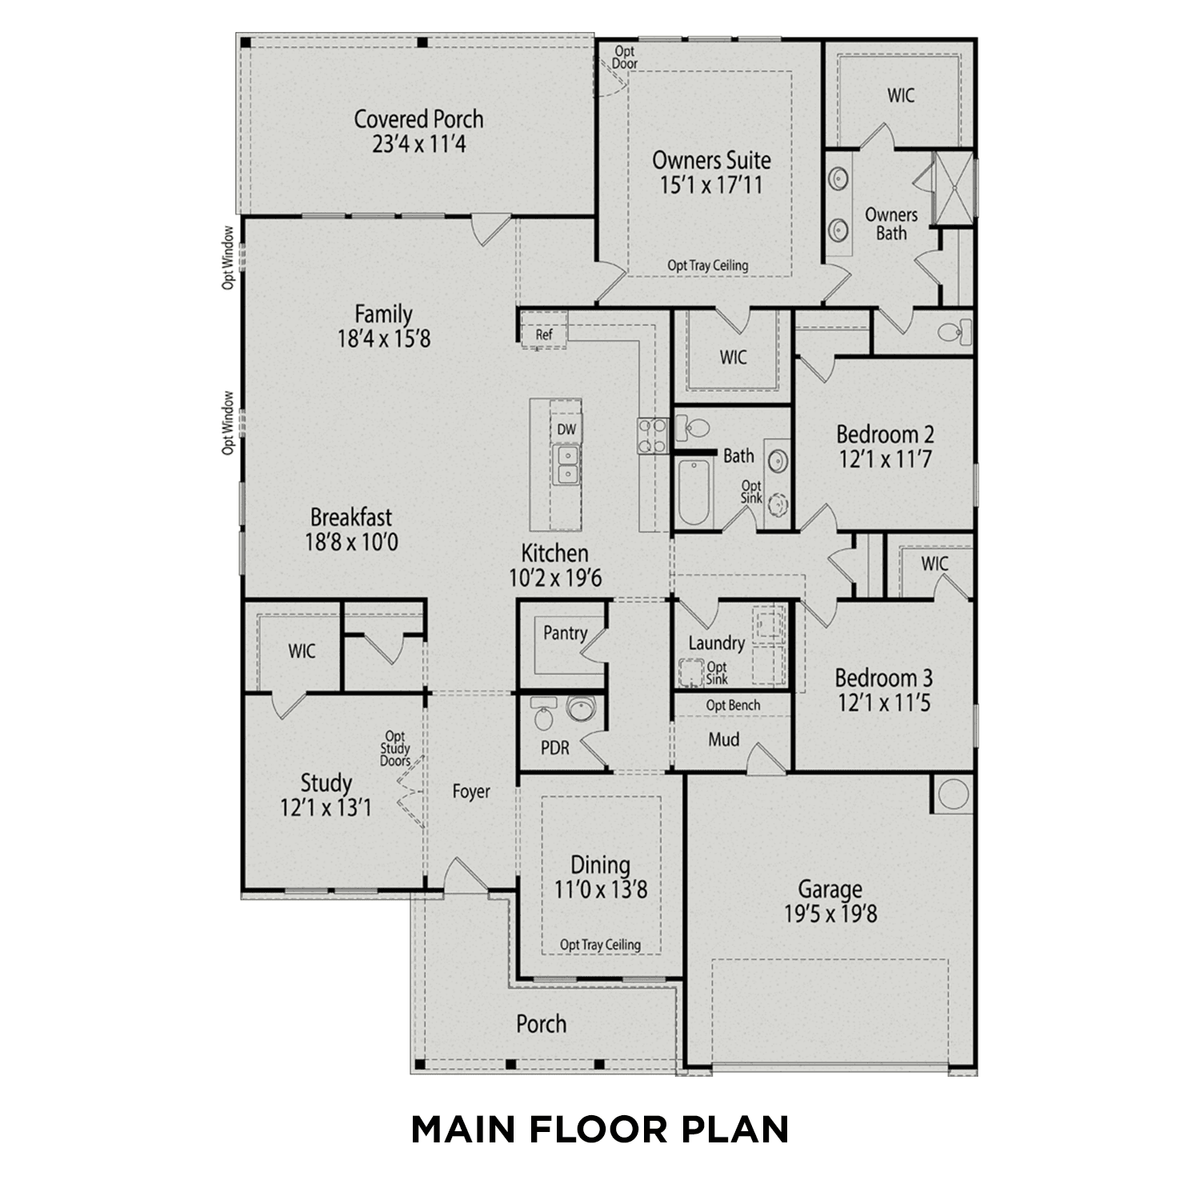 1 - The Magnolia A buildable floor plan layout in Davidson Homes' Tobacco Road community.